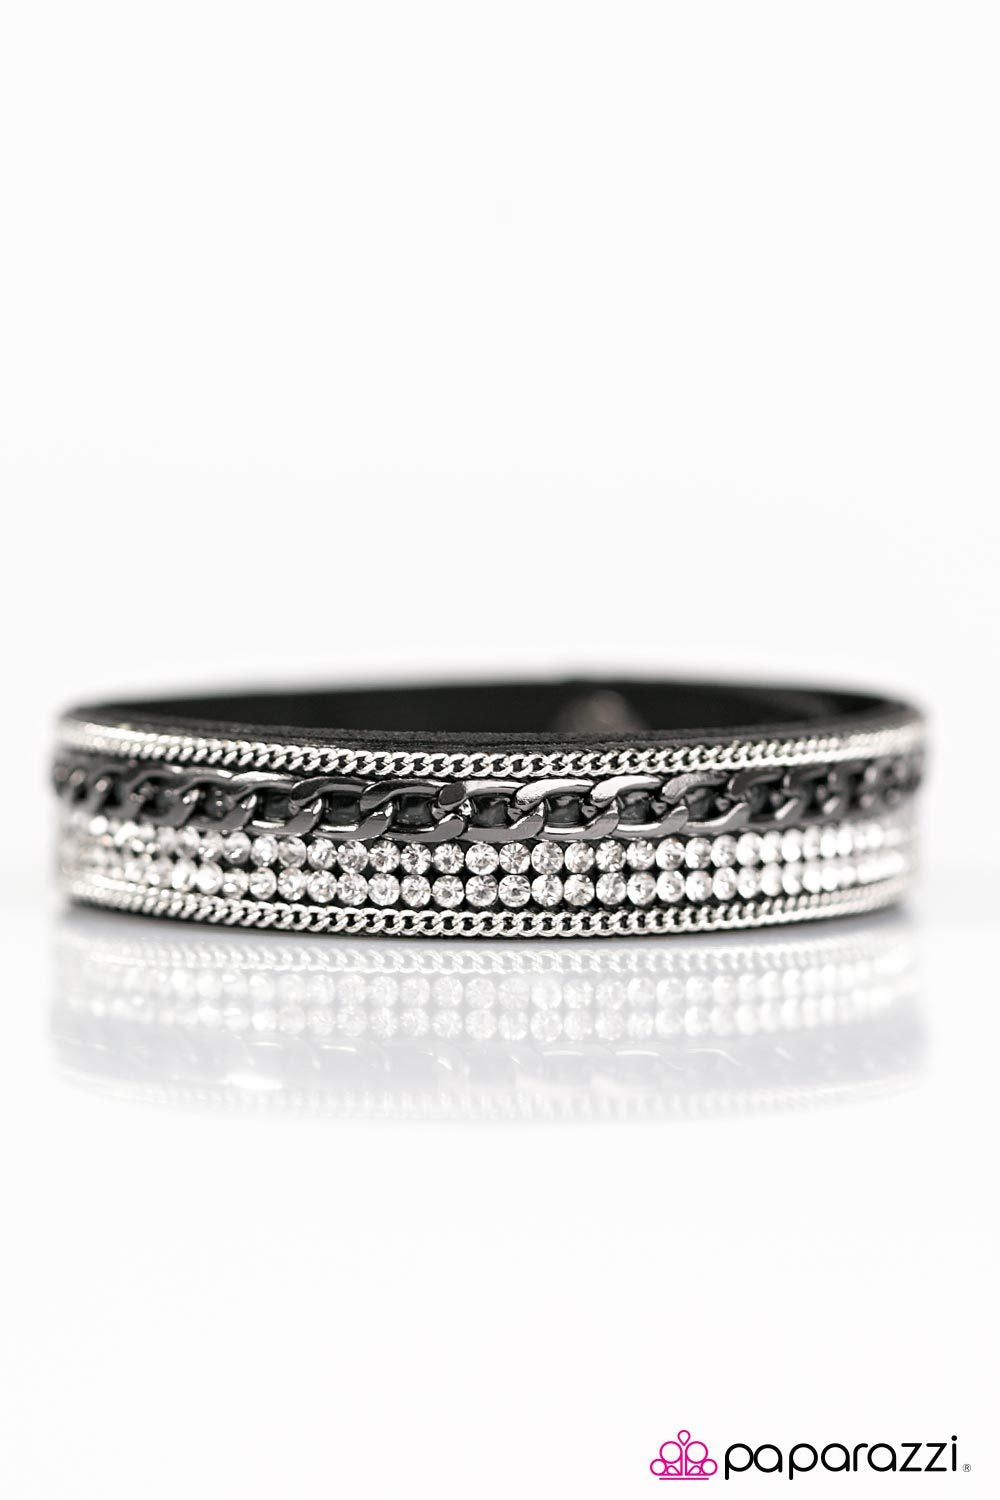 The Perfect Score Black and White Narrow Wrap Snap Bracelet - Paparazzi Accessories-CarasShop.com - $5 Jewelry by Cara Jewels